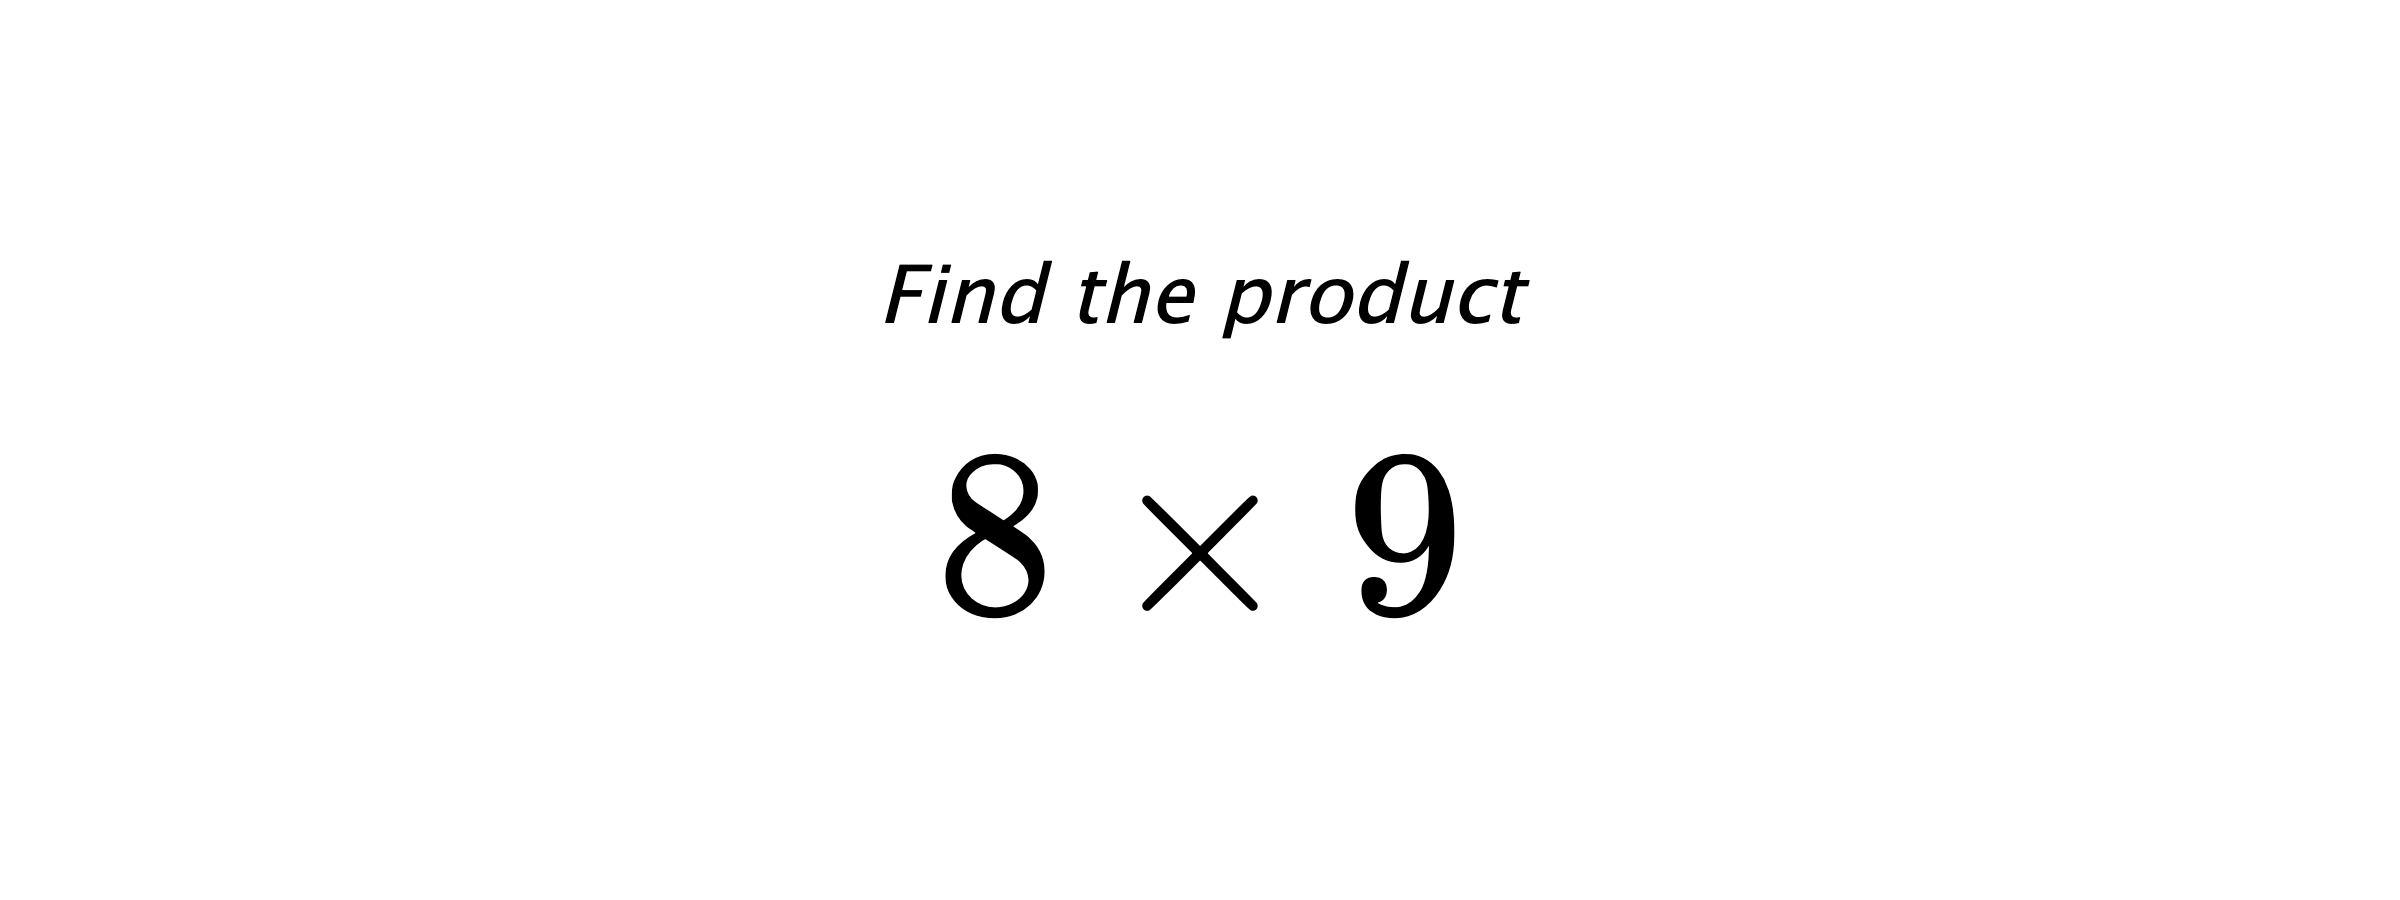 Find the product $ 8 \times 9 $